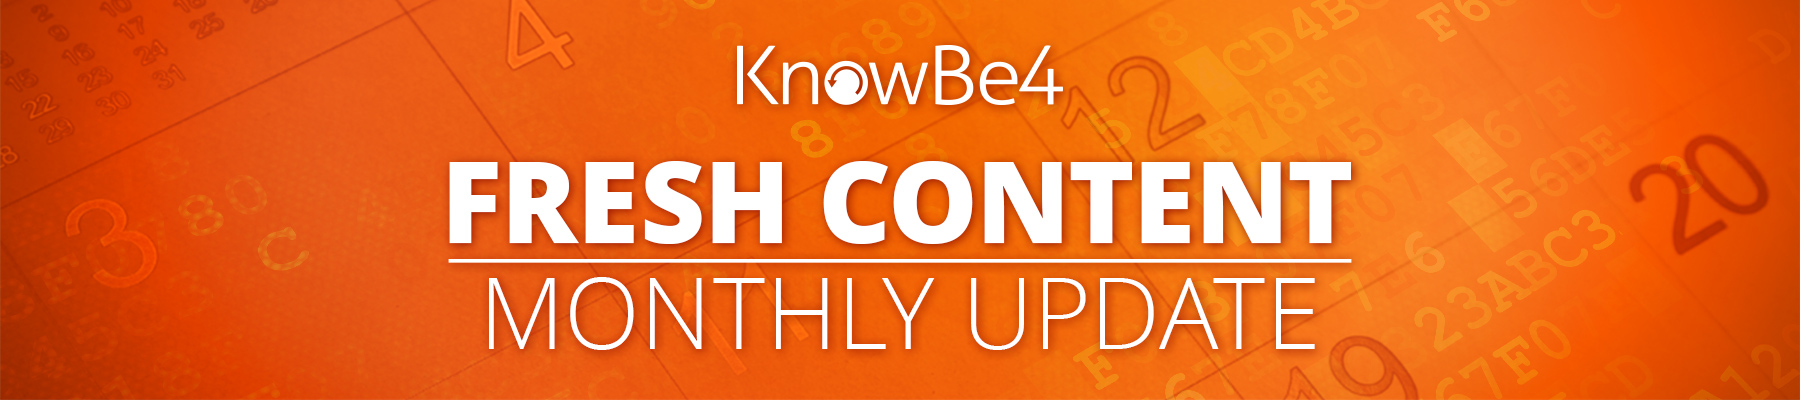 KnowBe4 Fresh Content Monthly Update